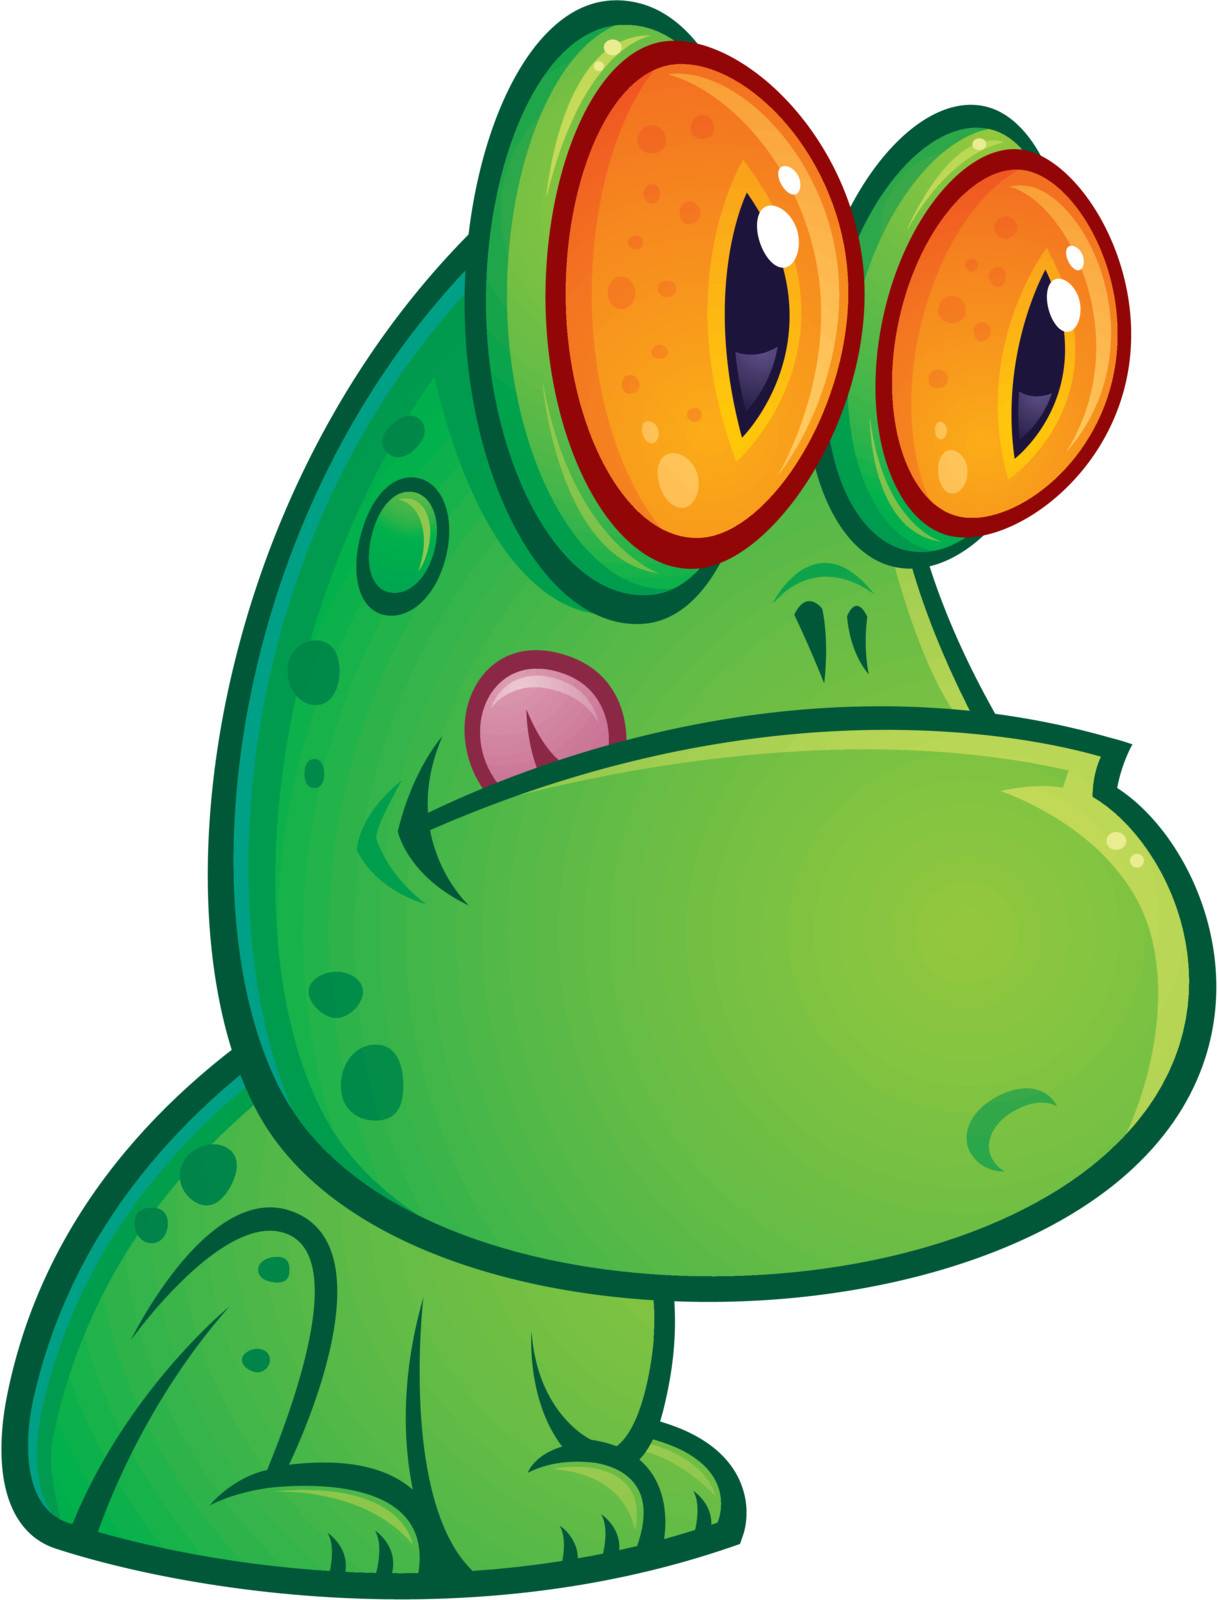 Vector cartoon illustration of a silly green frog with orange eyes sitting with his tongue sticking out.